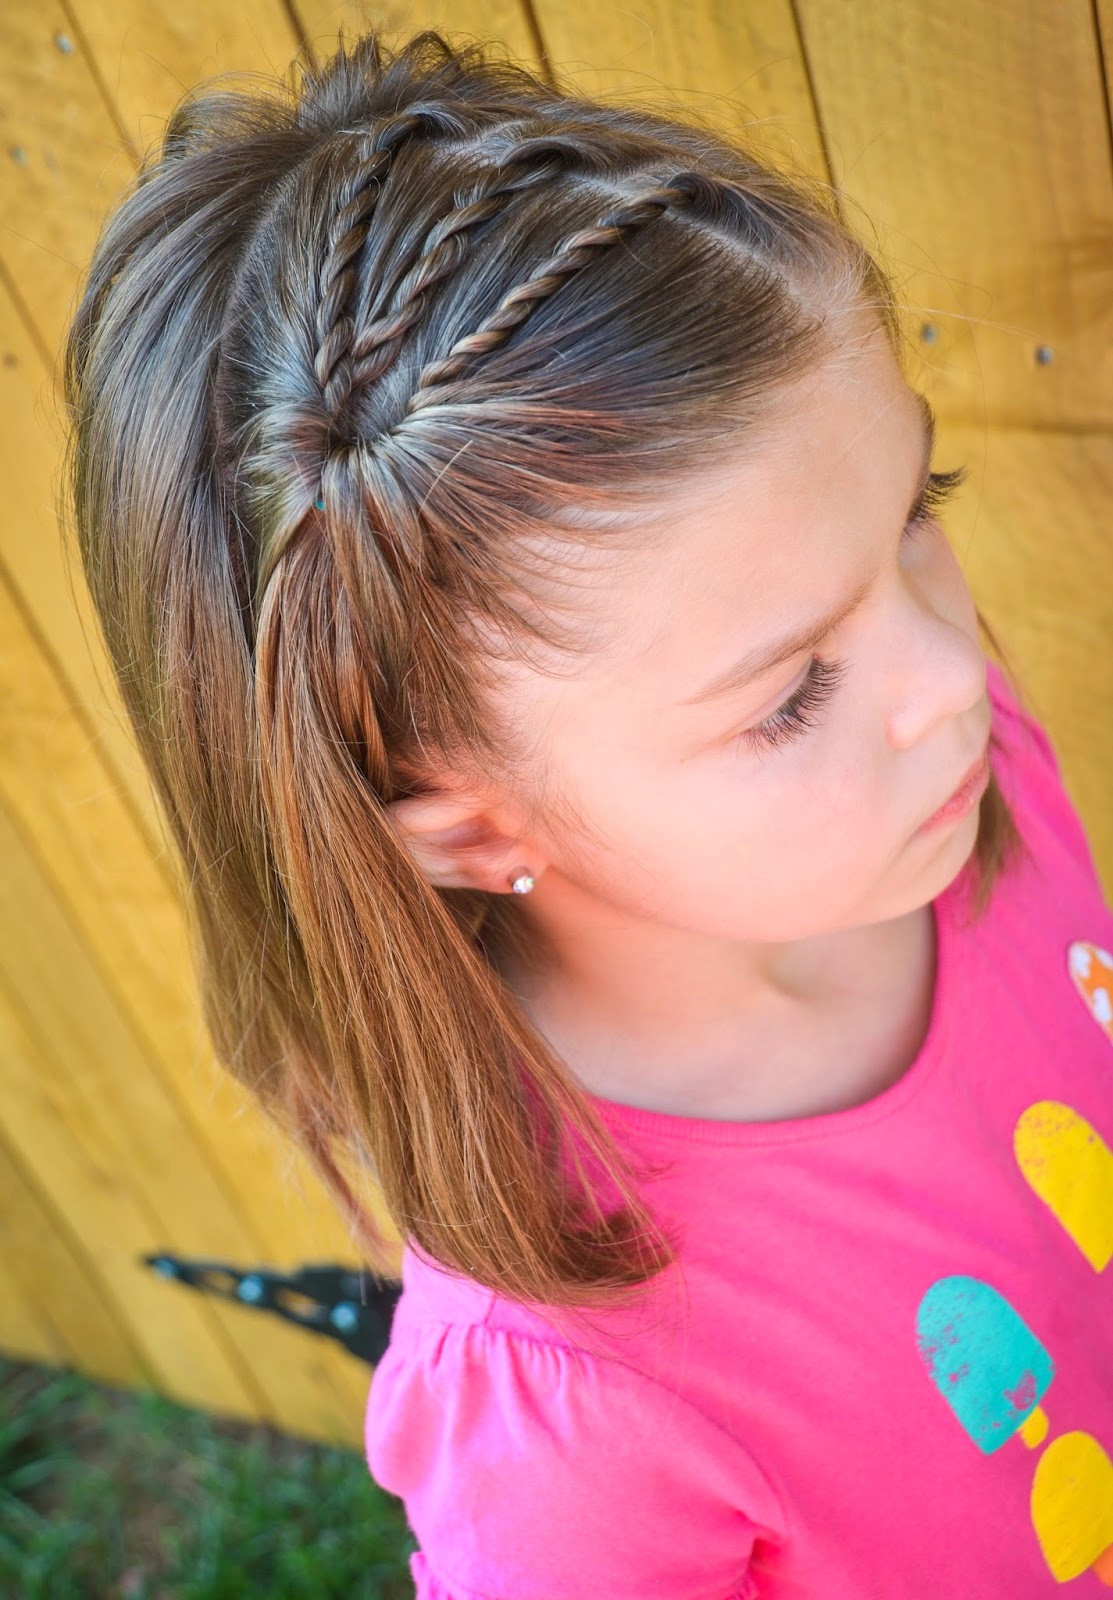 Hairstyles For Little Girl
 25 Little Girl Hairstyles you can do YOURSELF